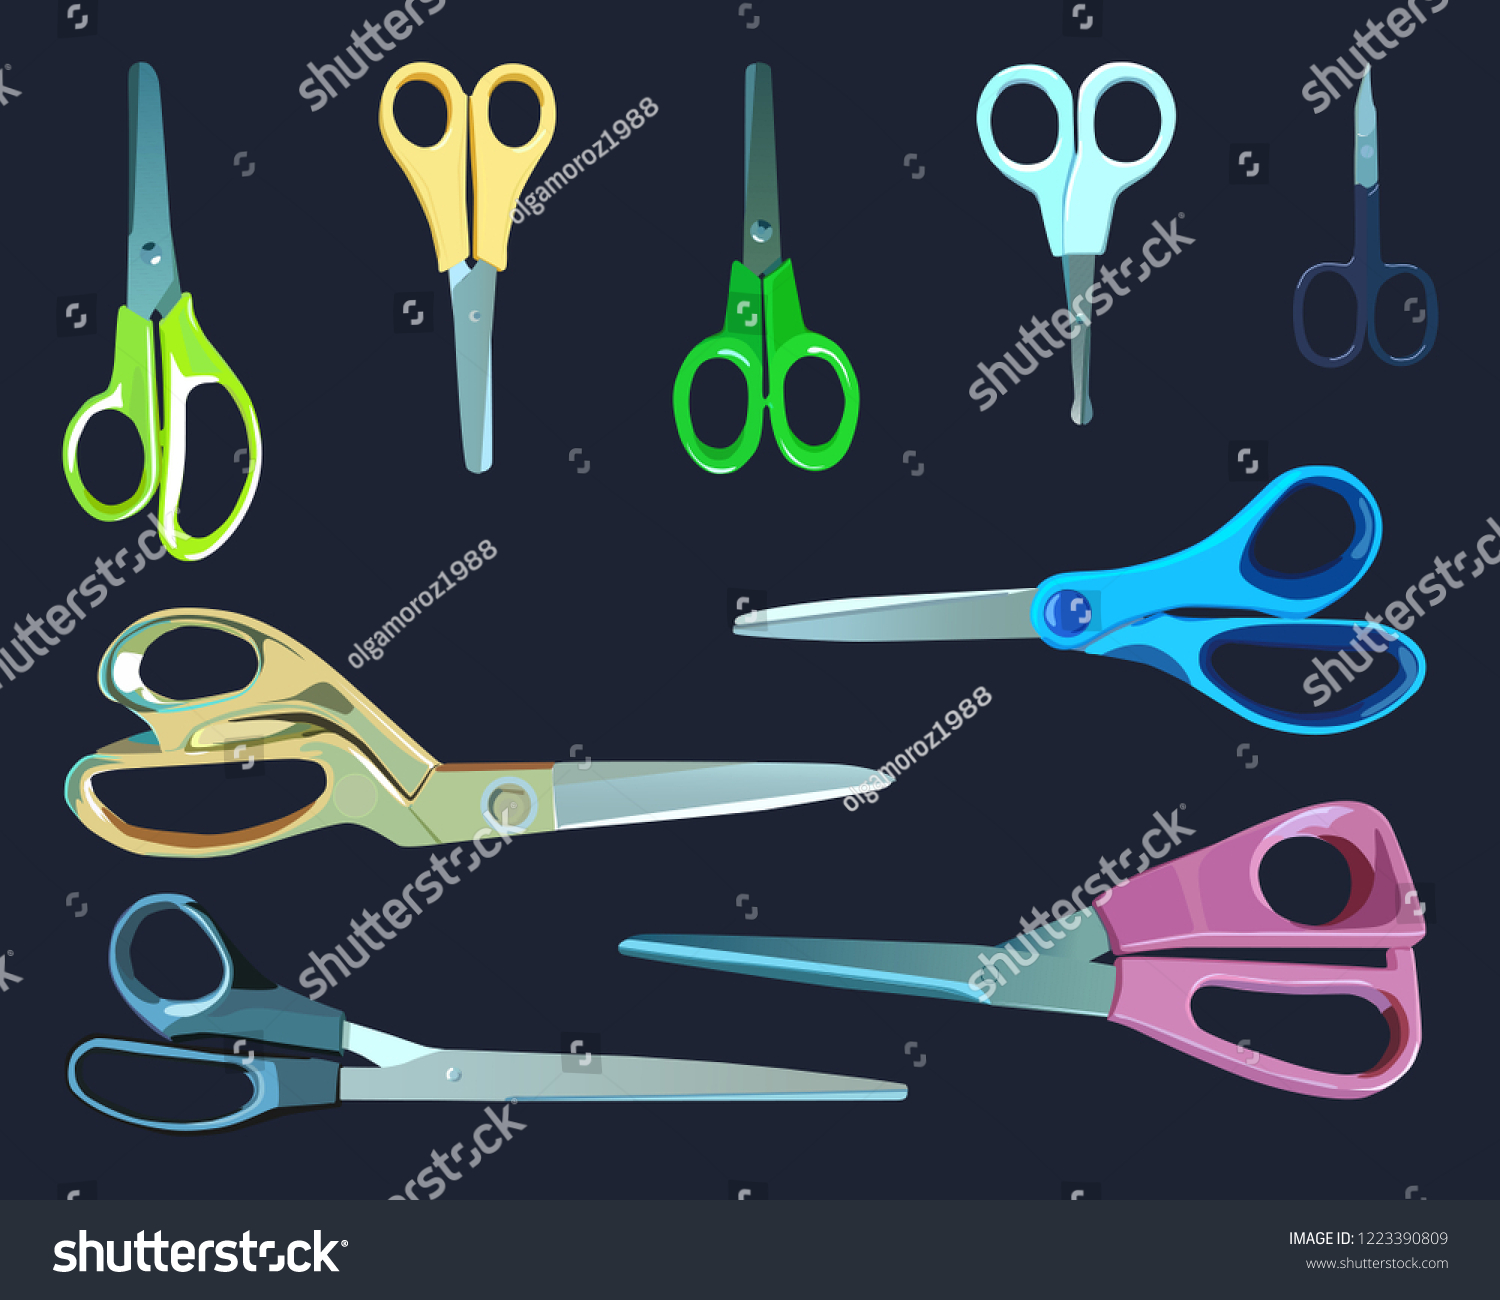 types of scissors and their uses